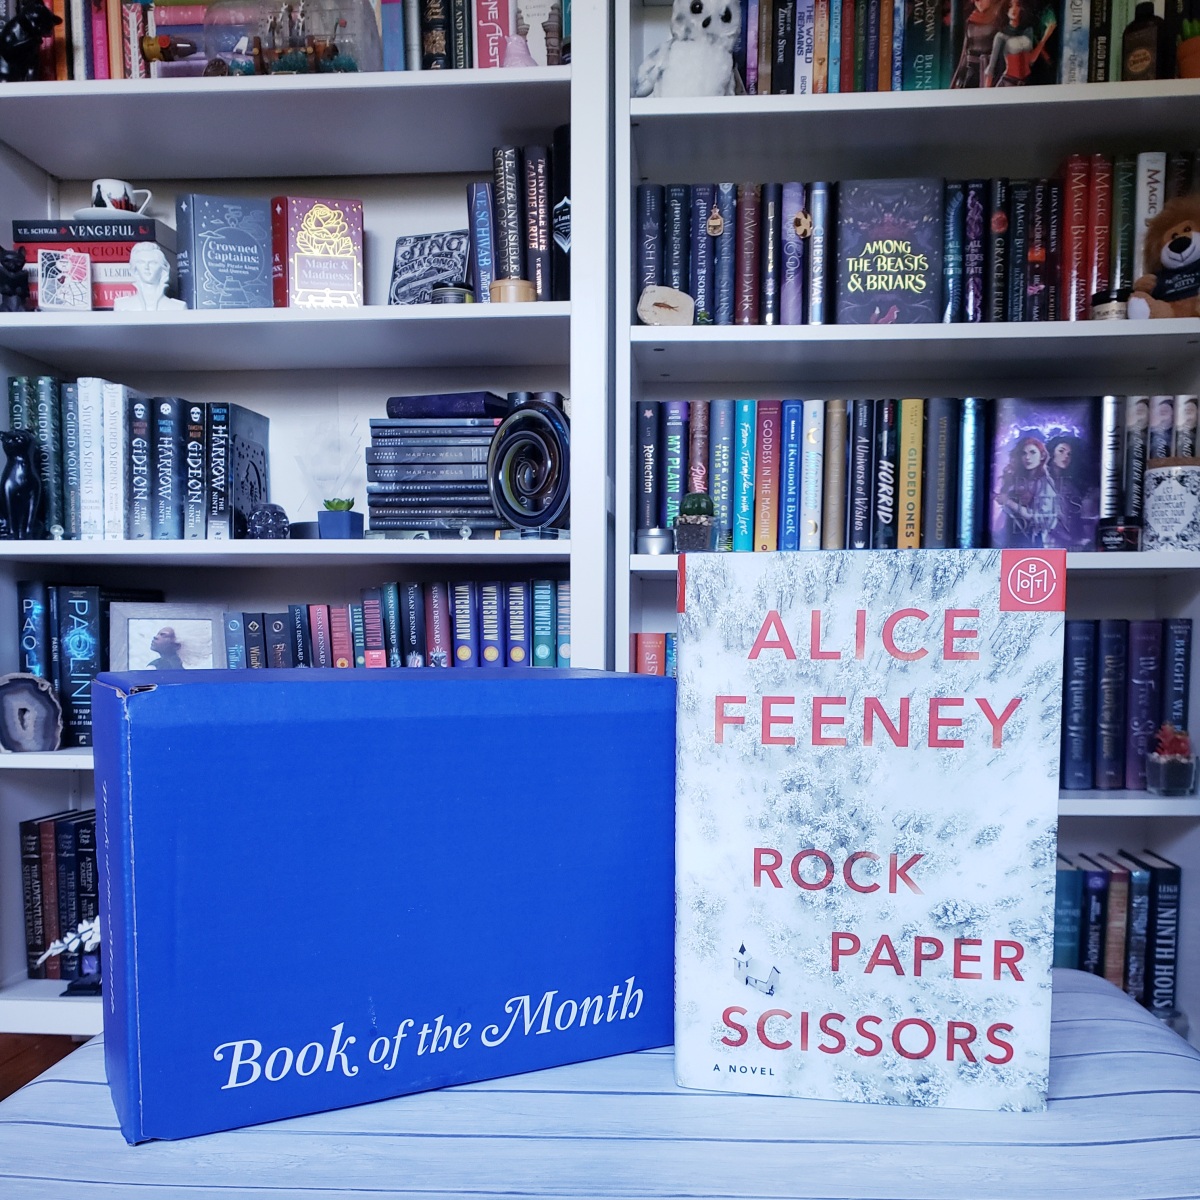 Review: Rock Paper Scissors by Alice Feeney – Quirky Cat's Fat Stacks